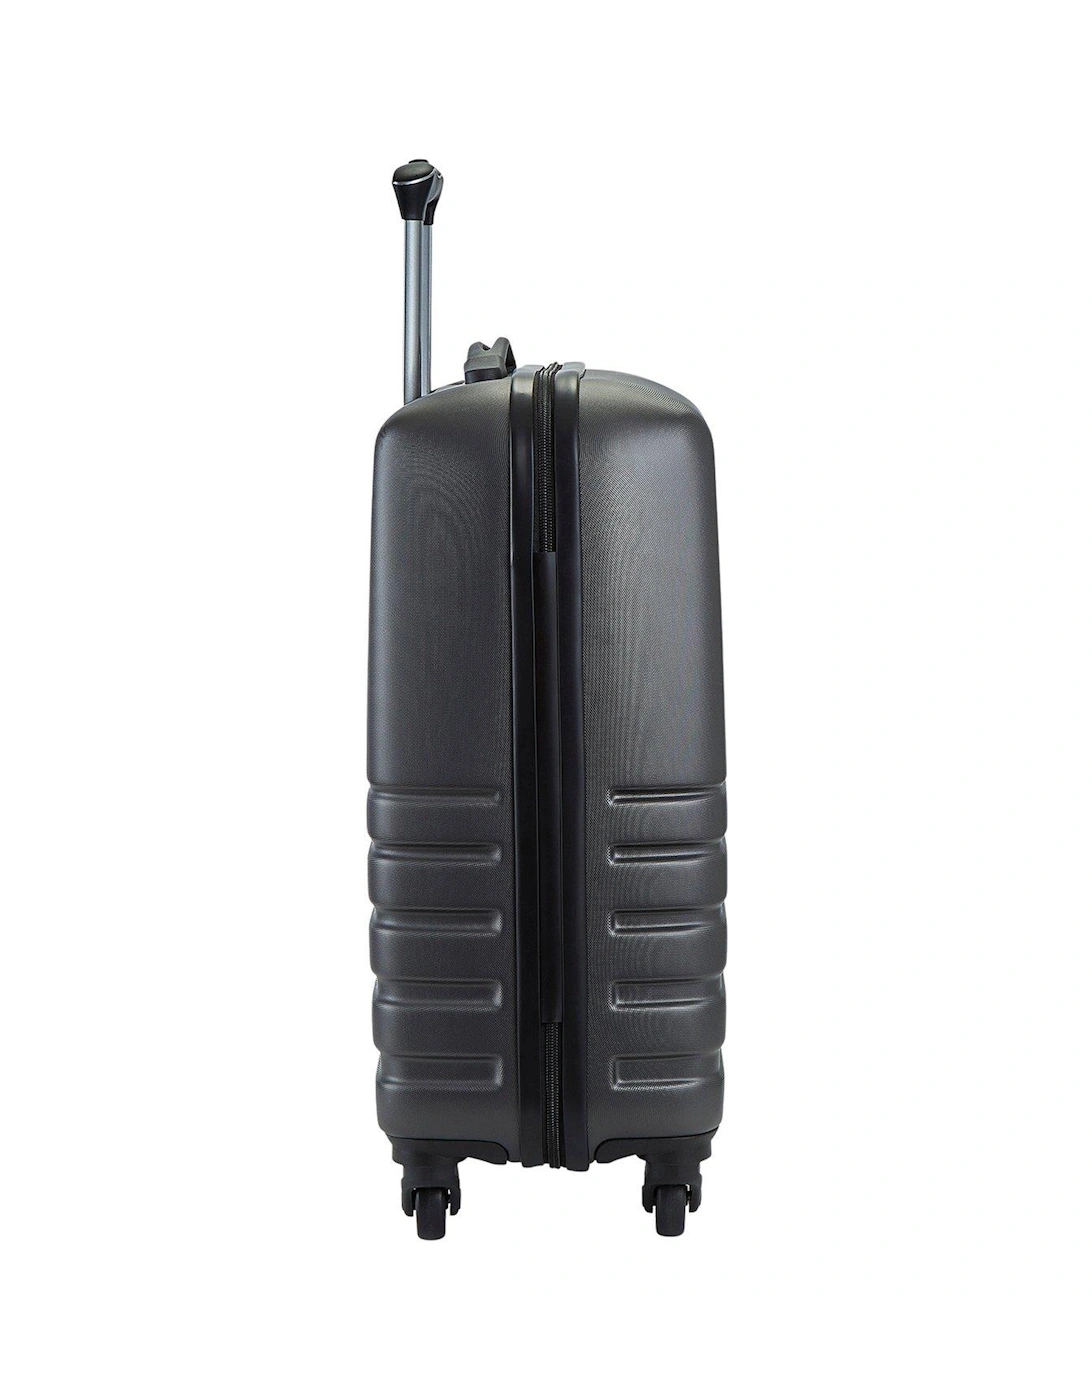 Byron 4 Wheel Hardsell Cabin Suitcase - Charcoal